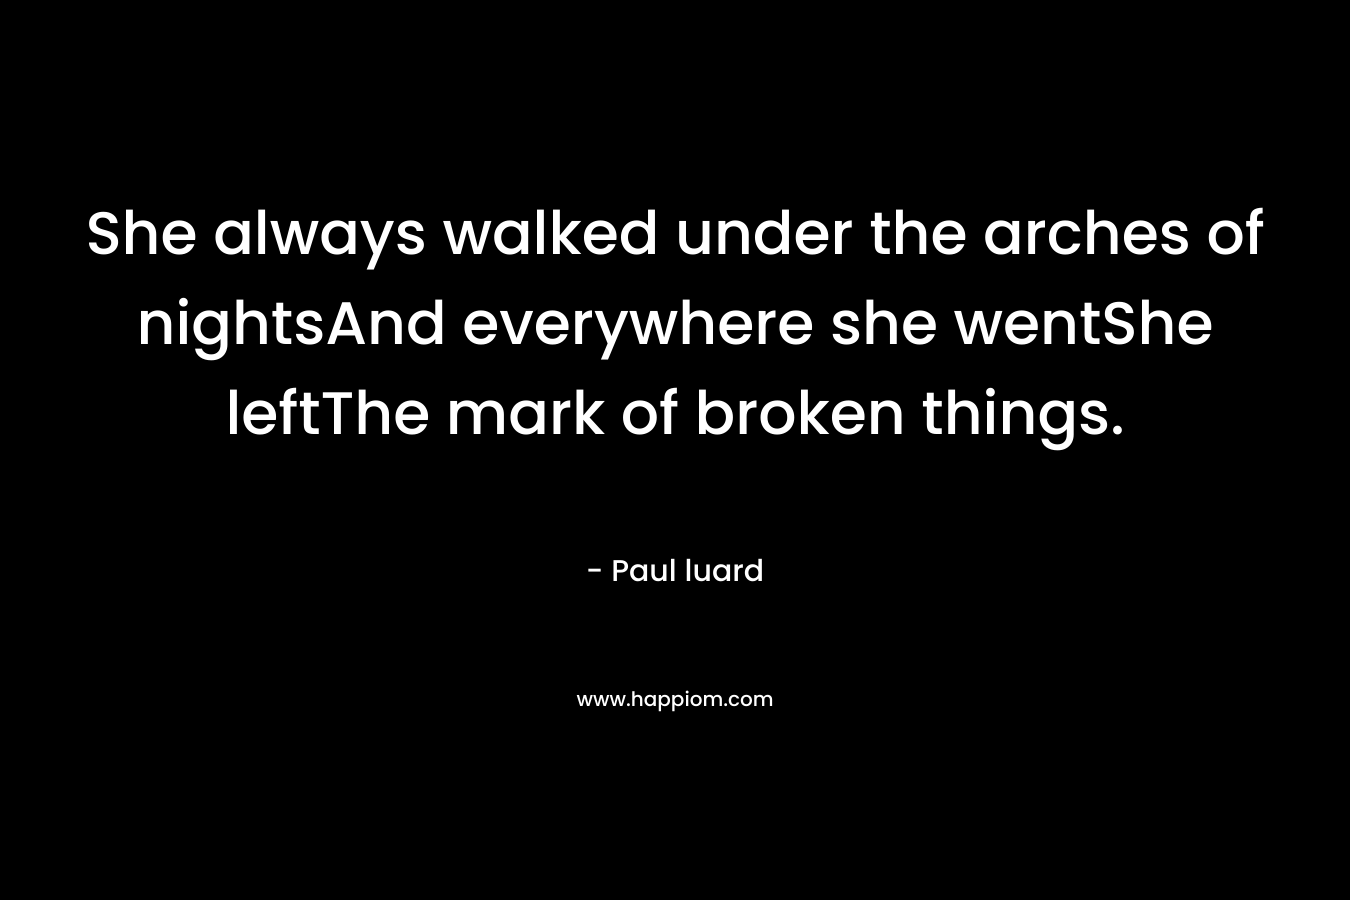 She always walked under the arches of nightsAnd everywhere she wentShe leftThe mark of broken things. – Paul luard